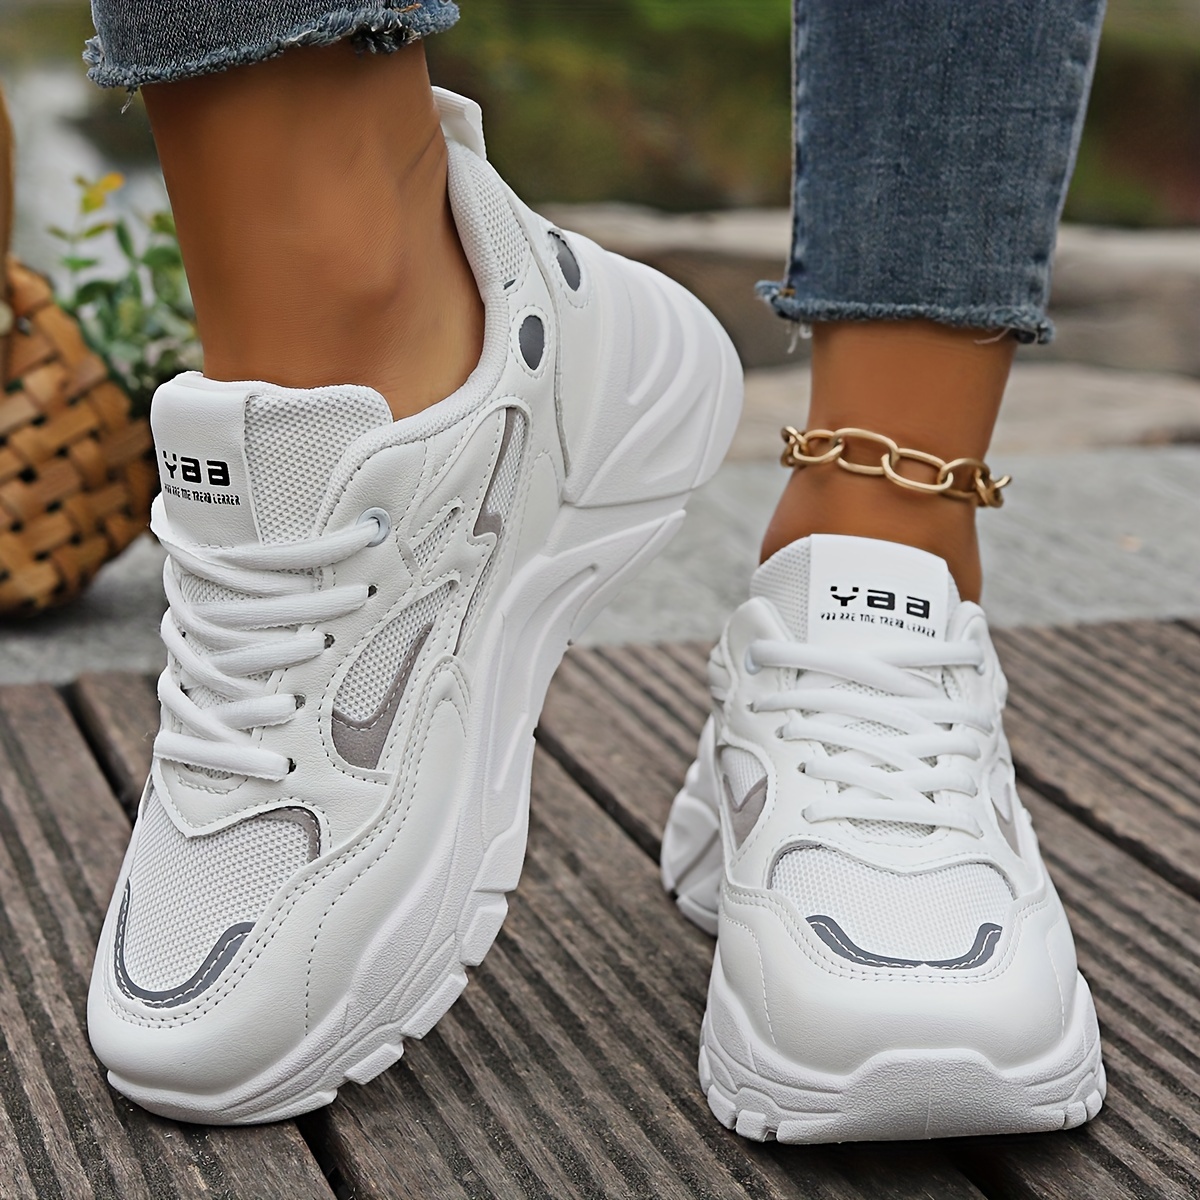 

Women's Colorblock Casual Sneakers, Lace Up Soft Sole Platform Walking Shoes, Low-top Breathable Trainers